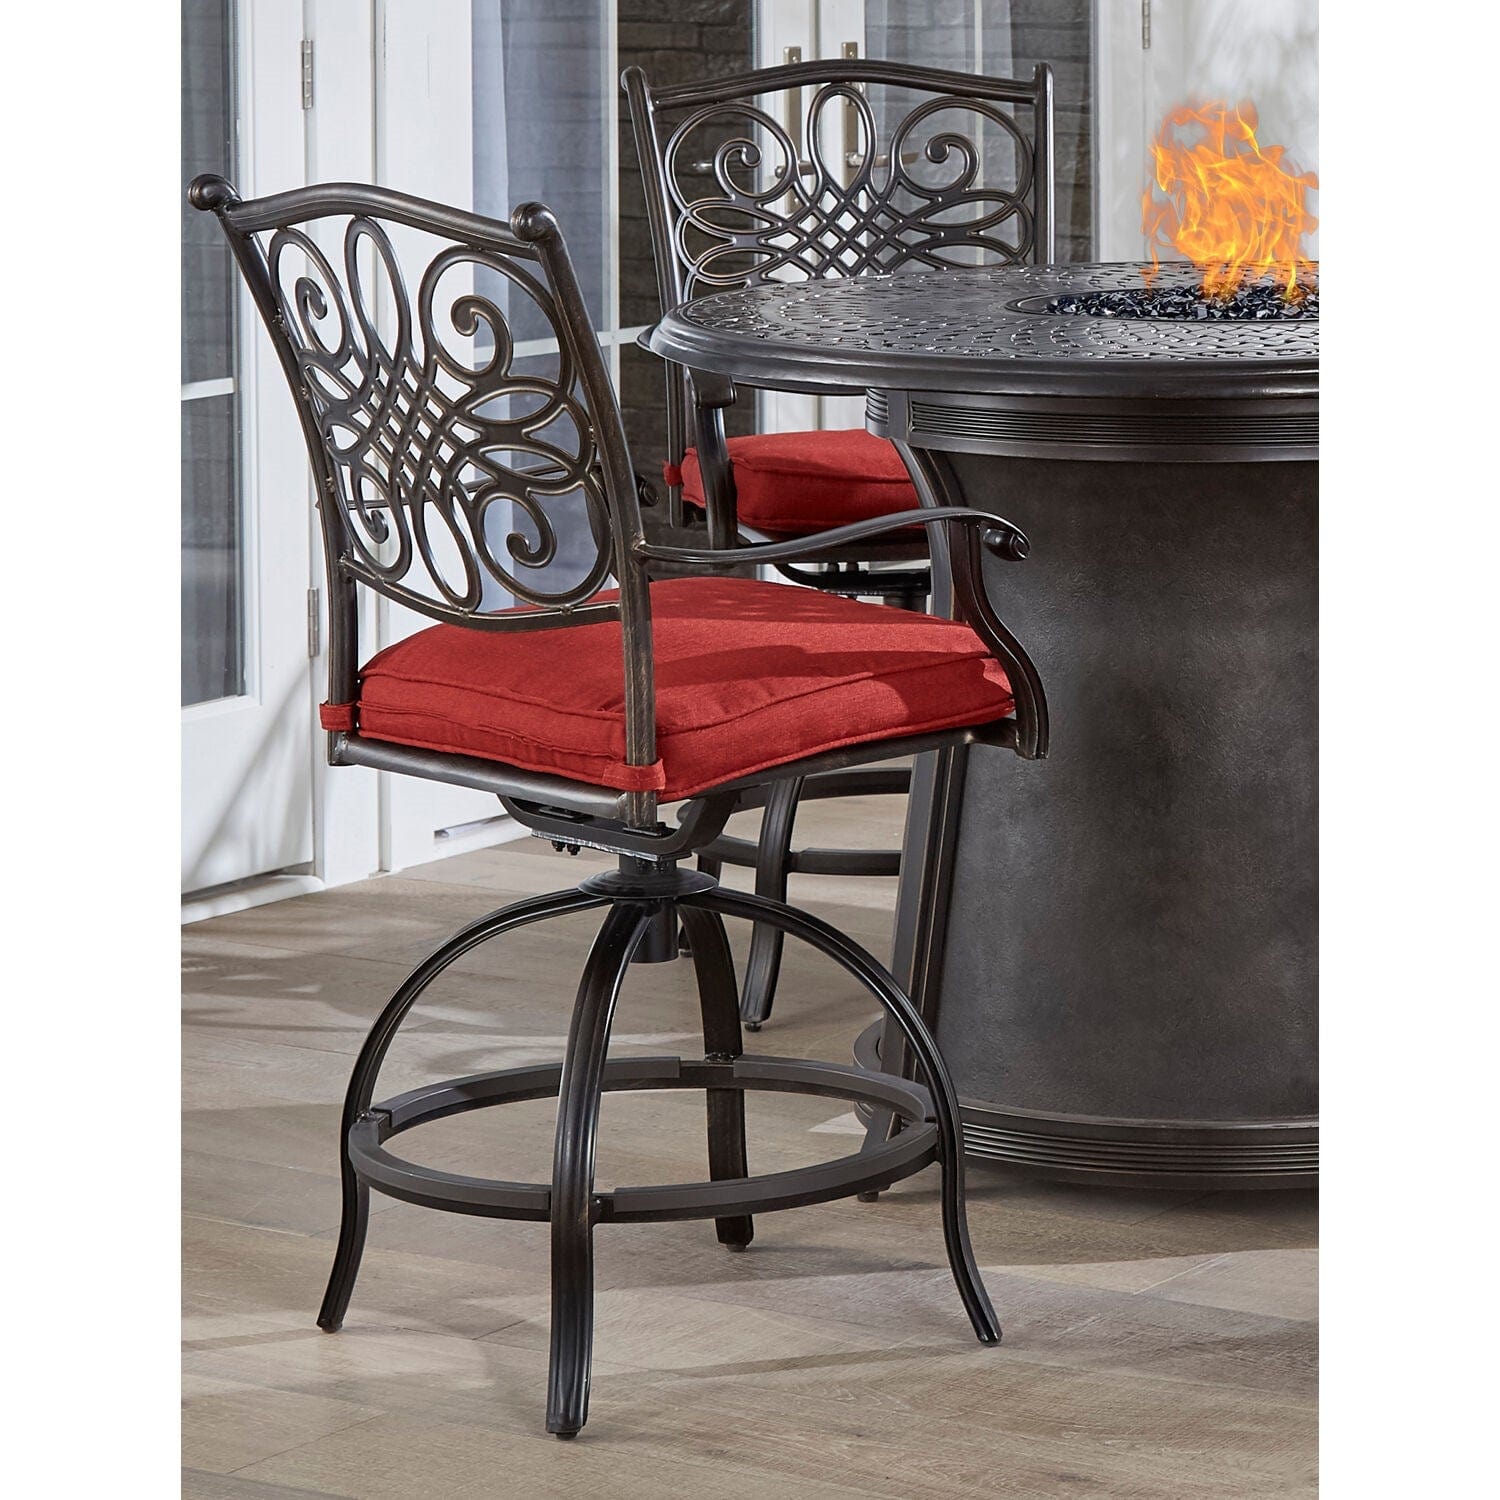 Hanover Fire Pit Dining Set Hanover Traditions 5-Piece High-Dining Set in Red with 4 Swivel Chairs | 48" Round Cast Top Fire Pit Table | 40,000 BTU | TRAD5PCFPRD-BR-R